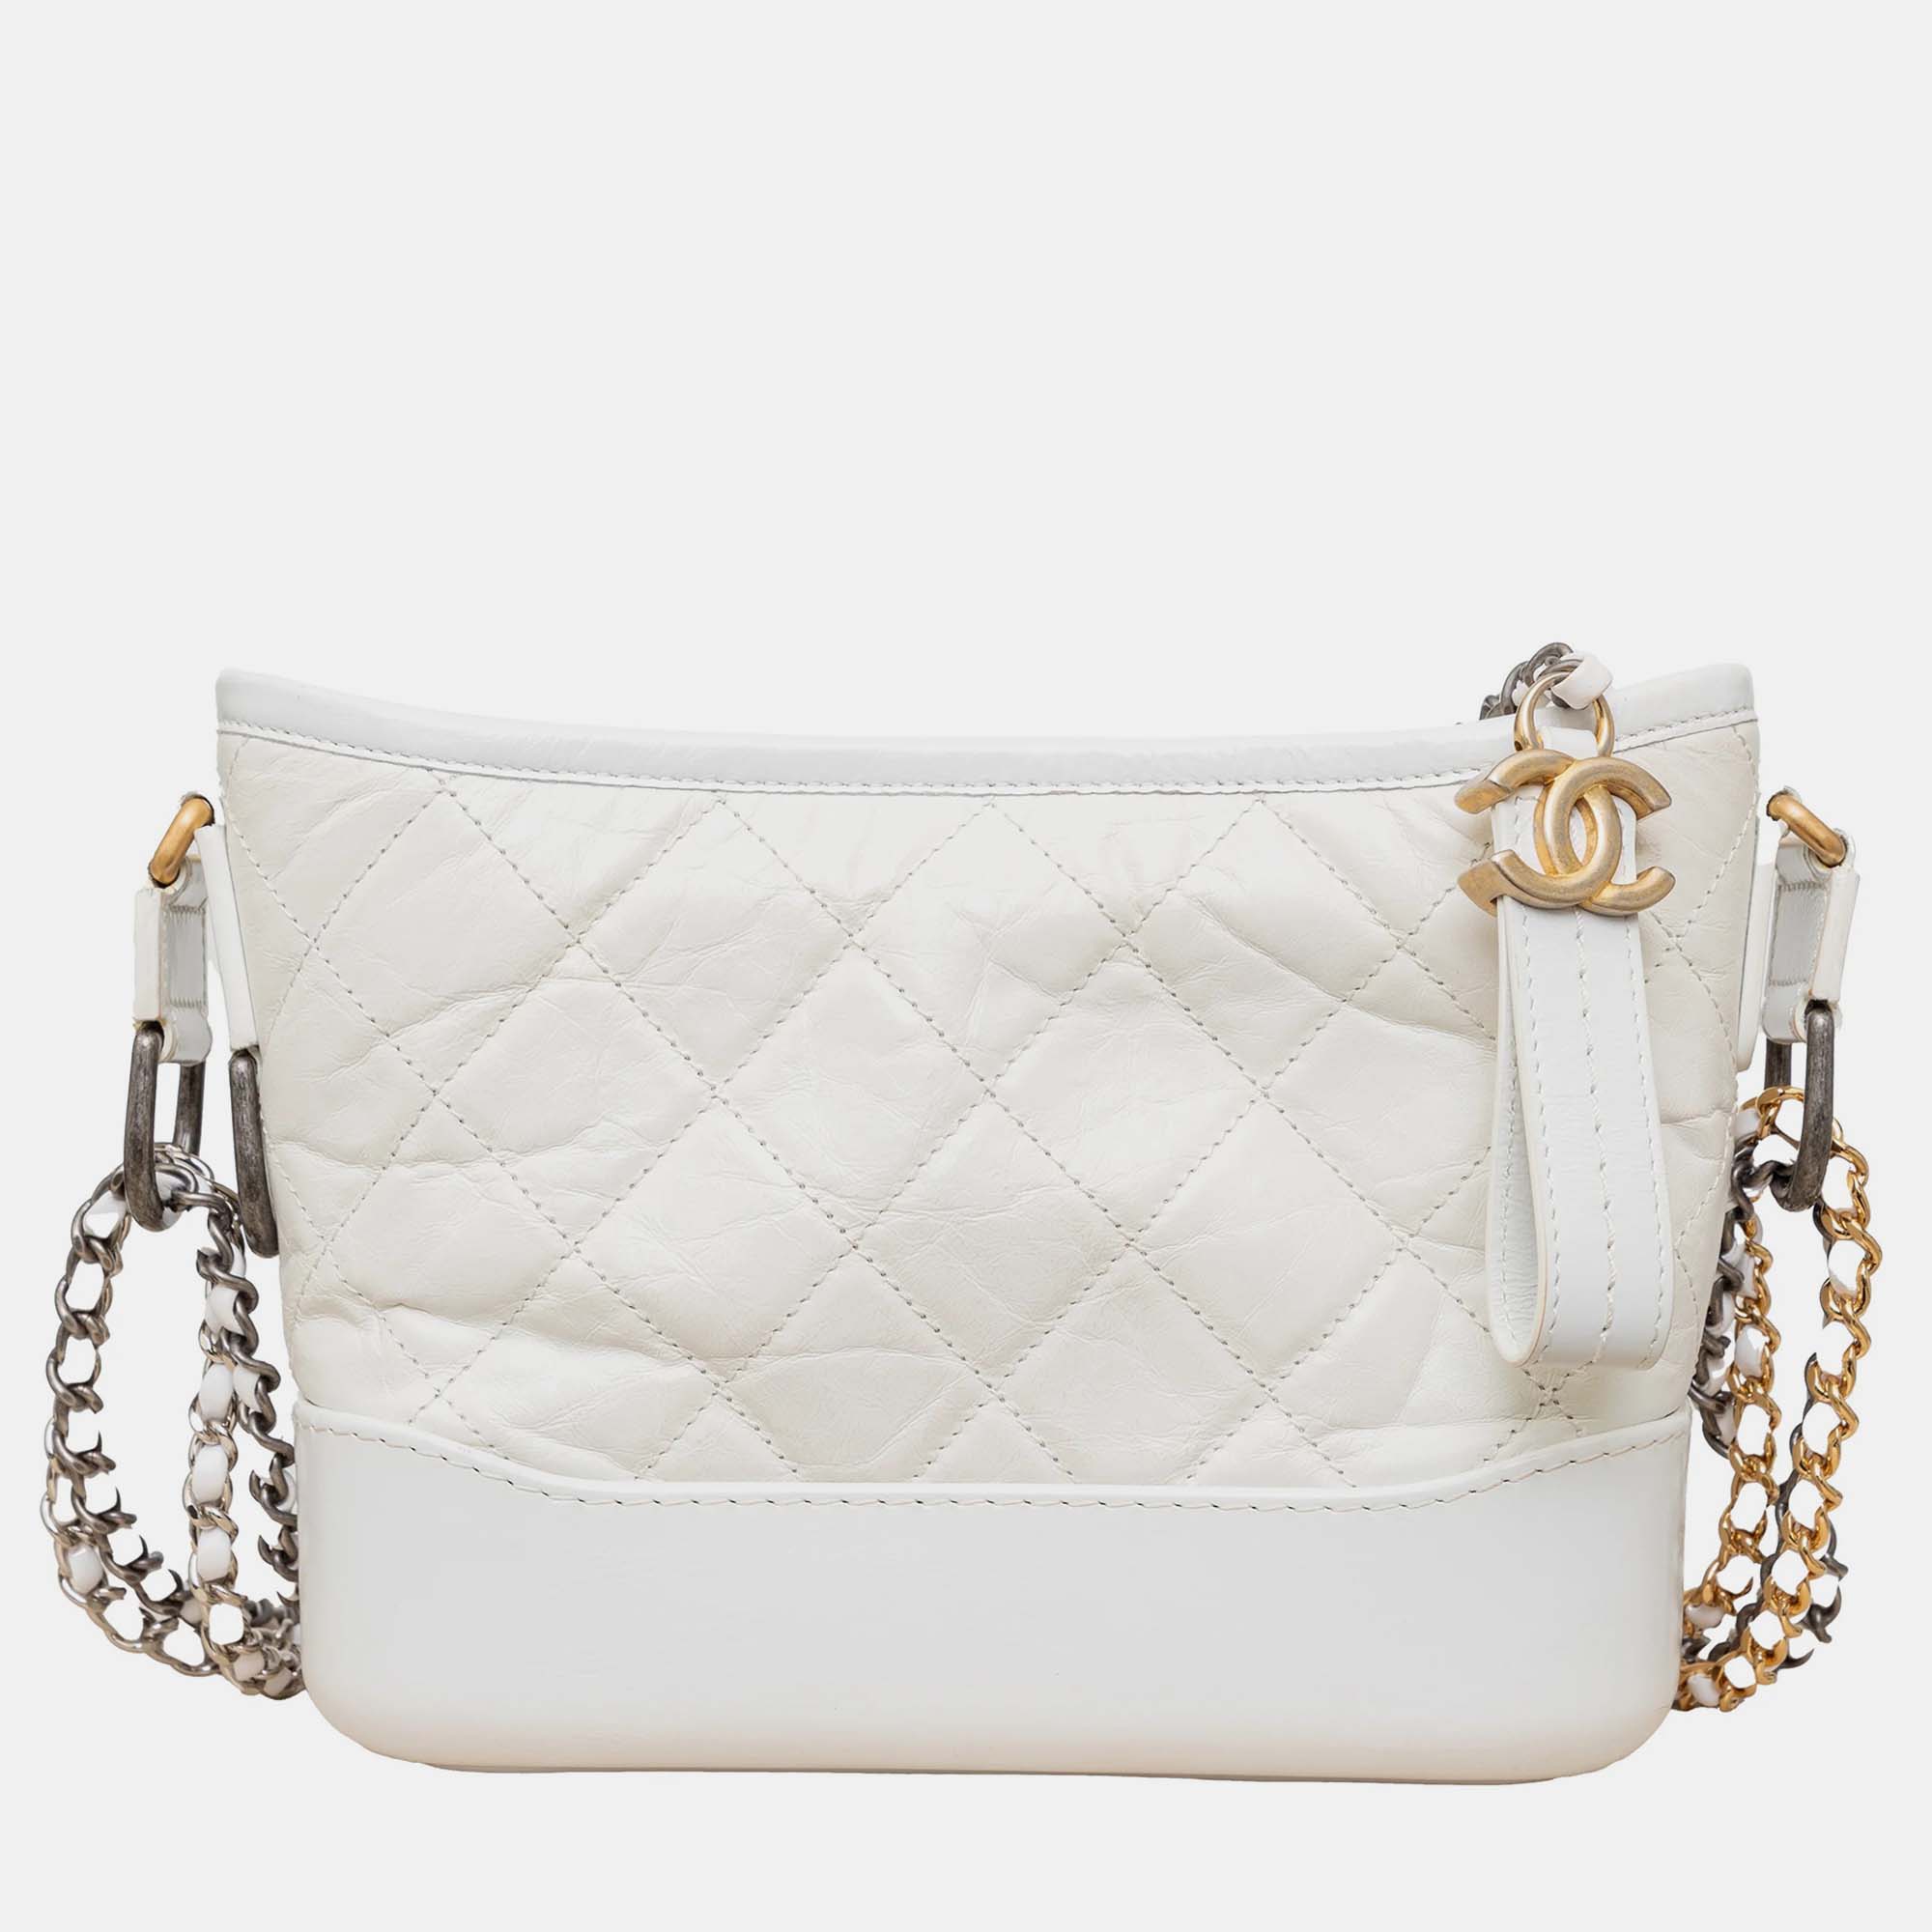 

Chanel Quilted Leather Gabrielle Hobo Bag - '10s White Leather